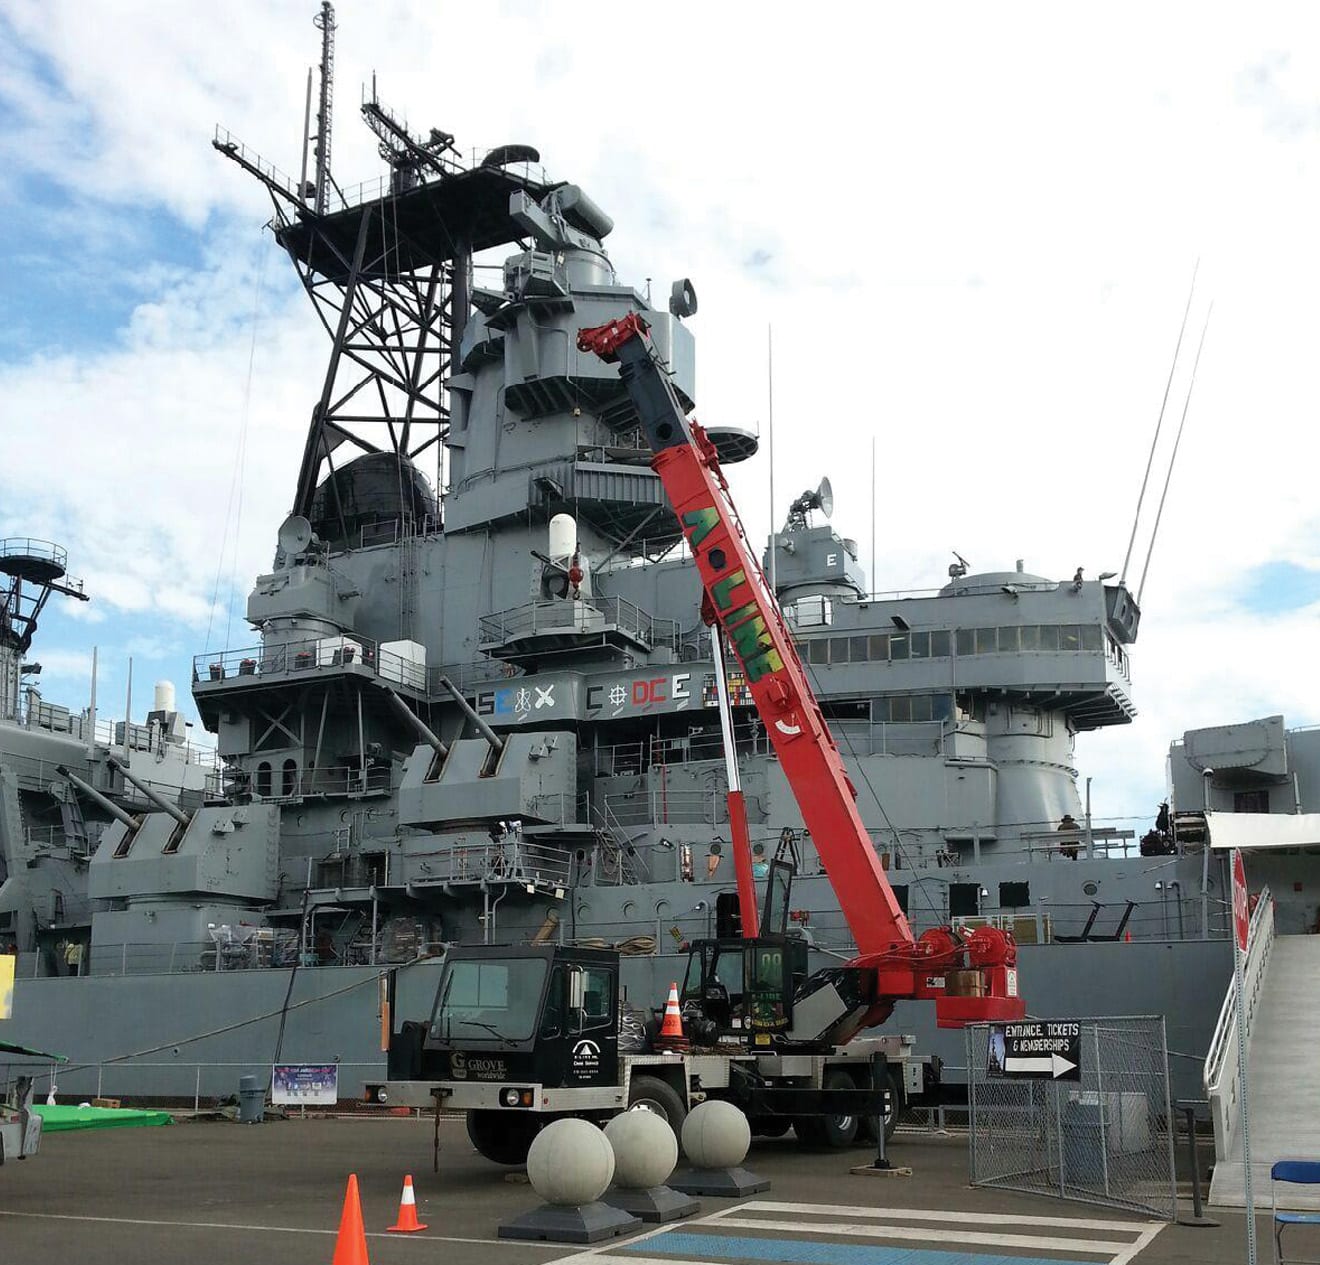 Crane in front of the USS Iowa in Los Angeles